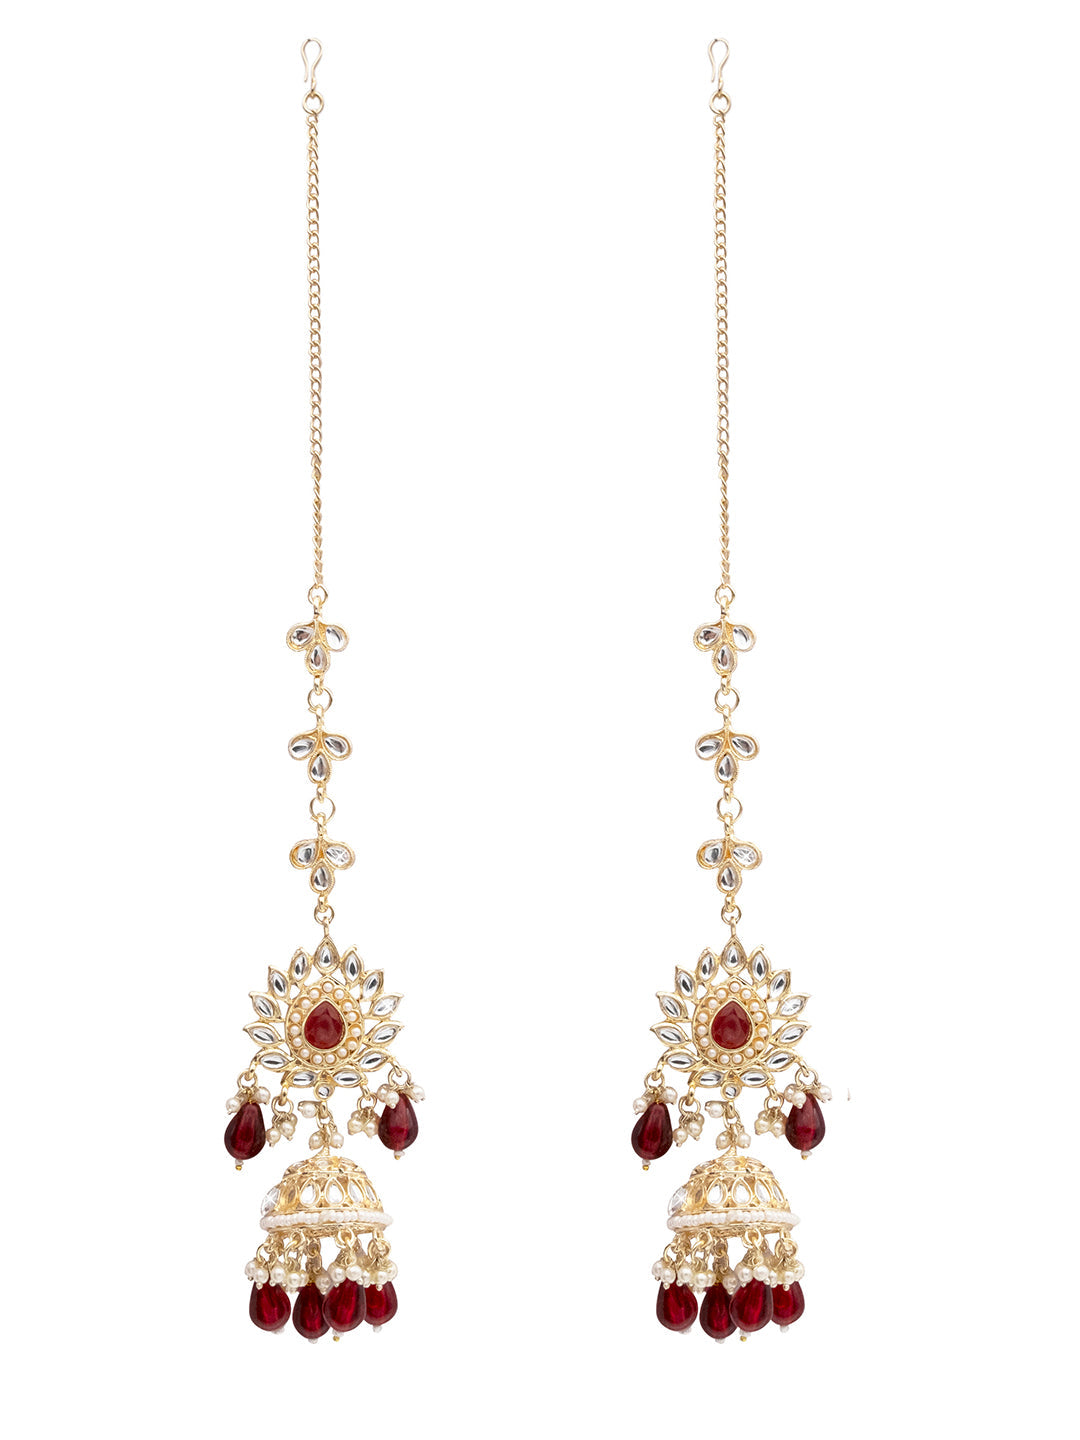 Amazon.com: Efulgenz Indian Bollywood Jewelry Dangling Earring with Layered  Jhumka Tassels Ear Support Chain Hair Accessory (Style 1): Clothing, Shoes  & Jewelry